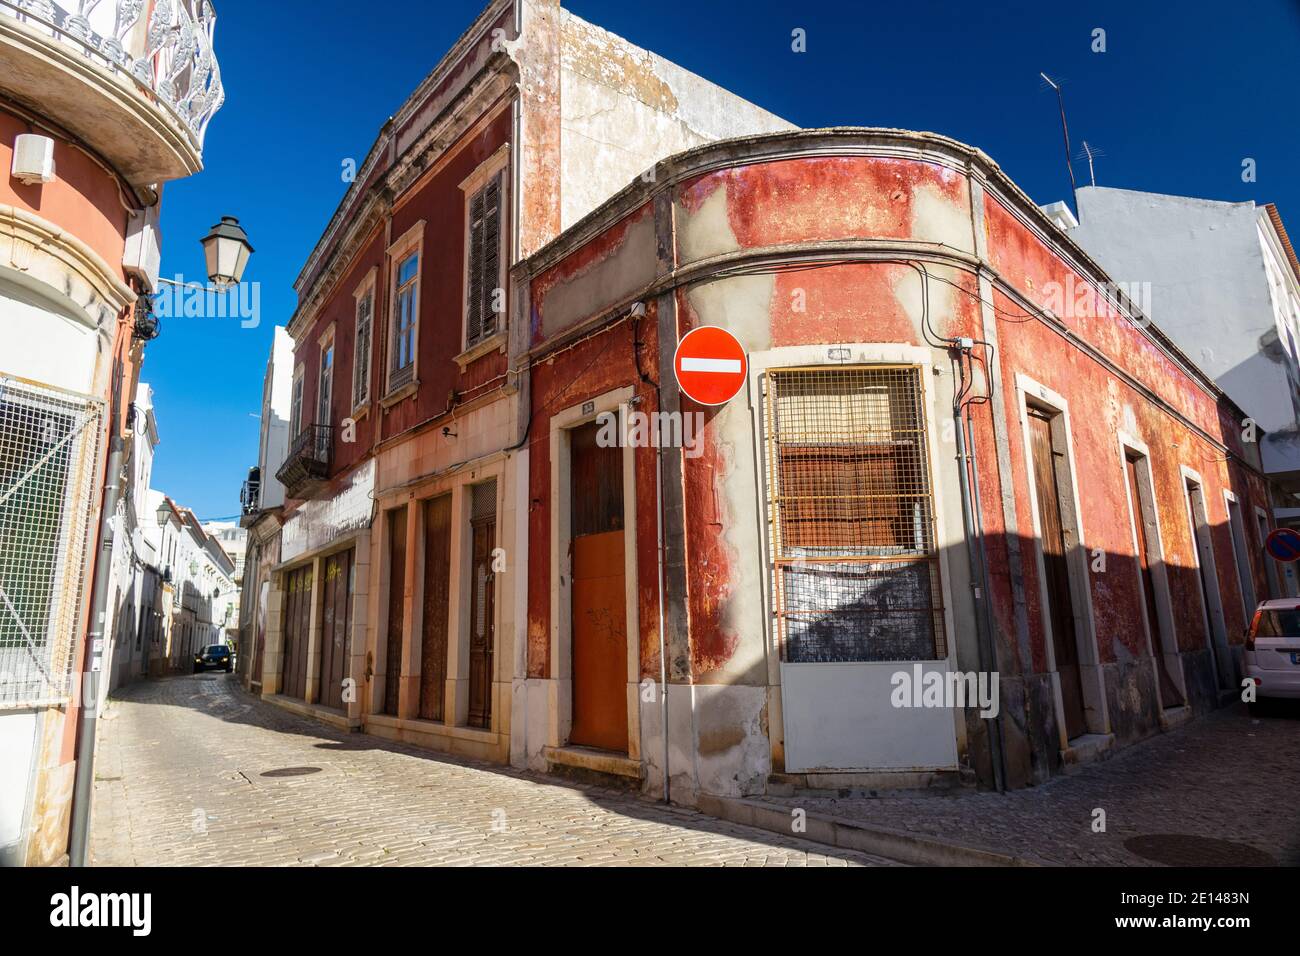 Old Historic Buildings On A Narrow Cobble Stone Street In Loule The Algarve Portugal Stock Photo